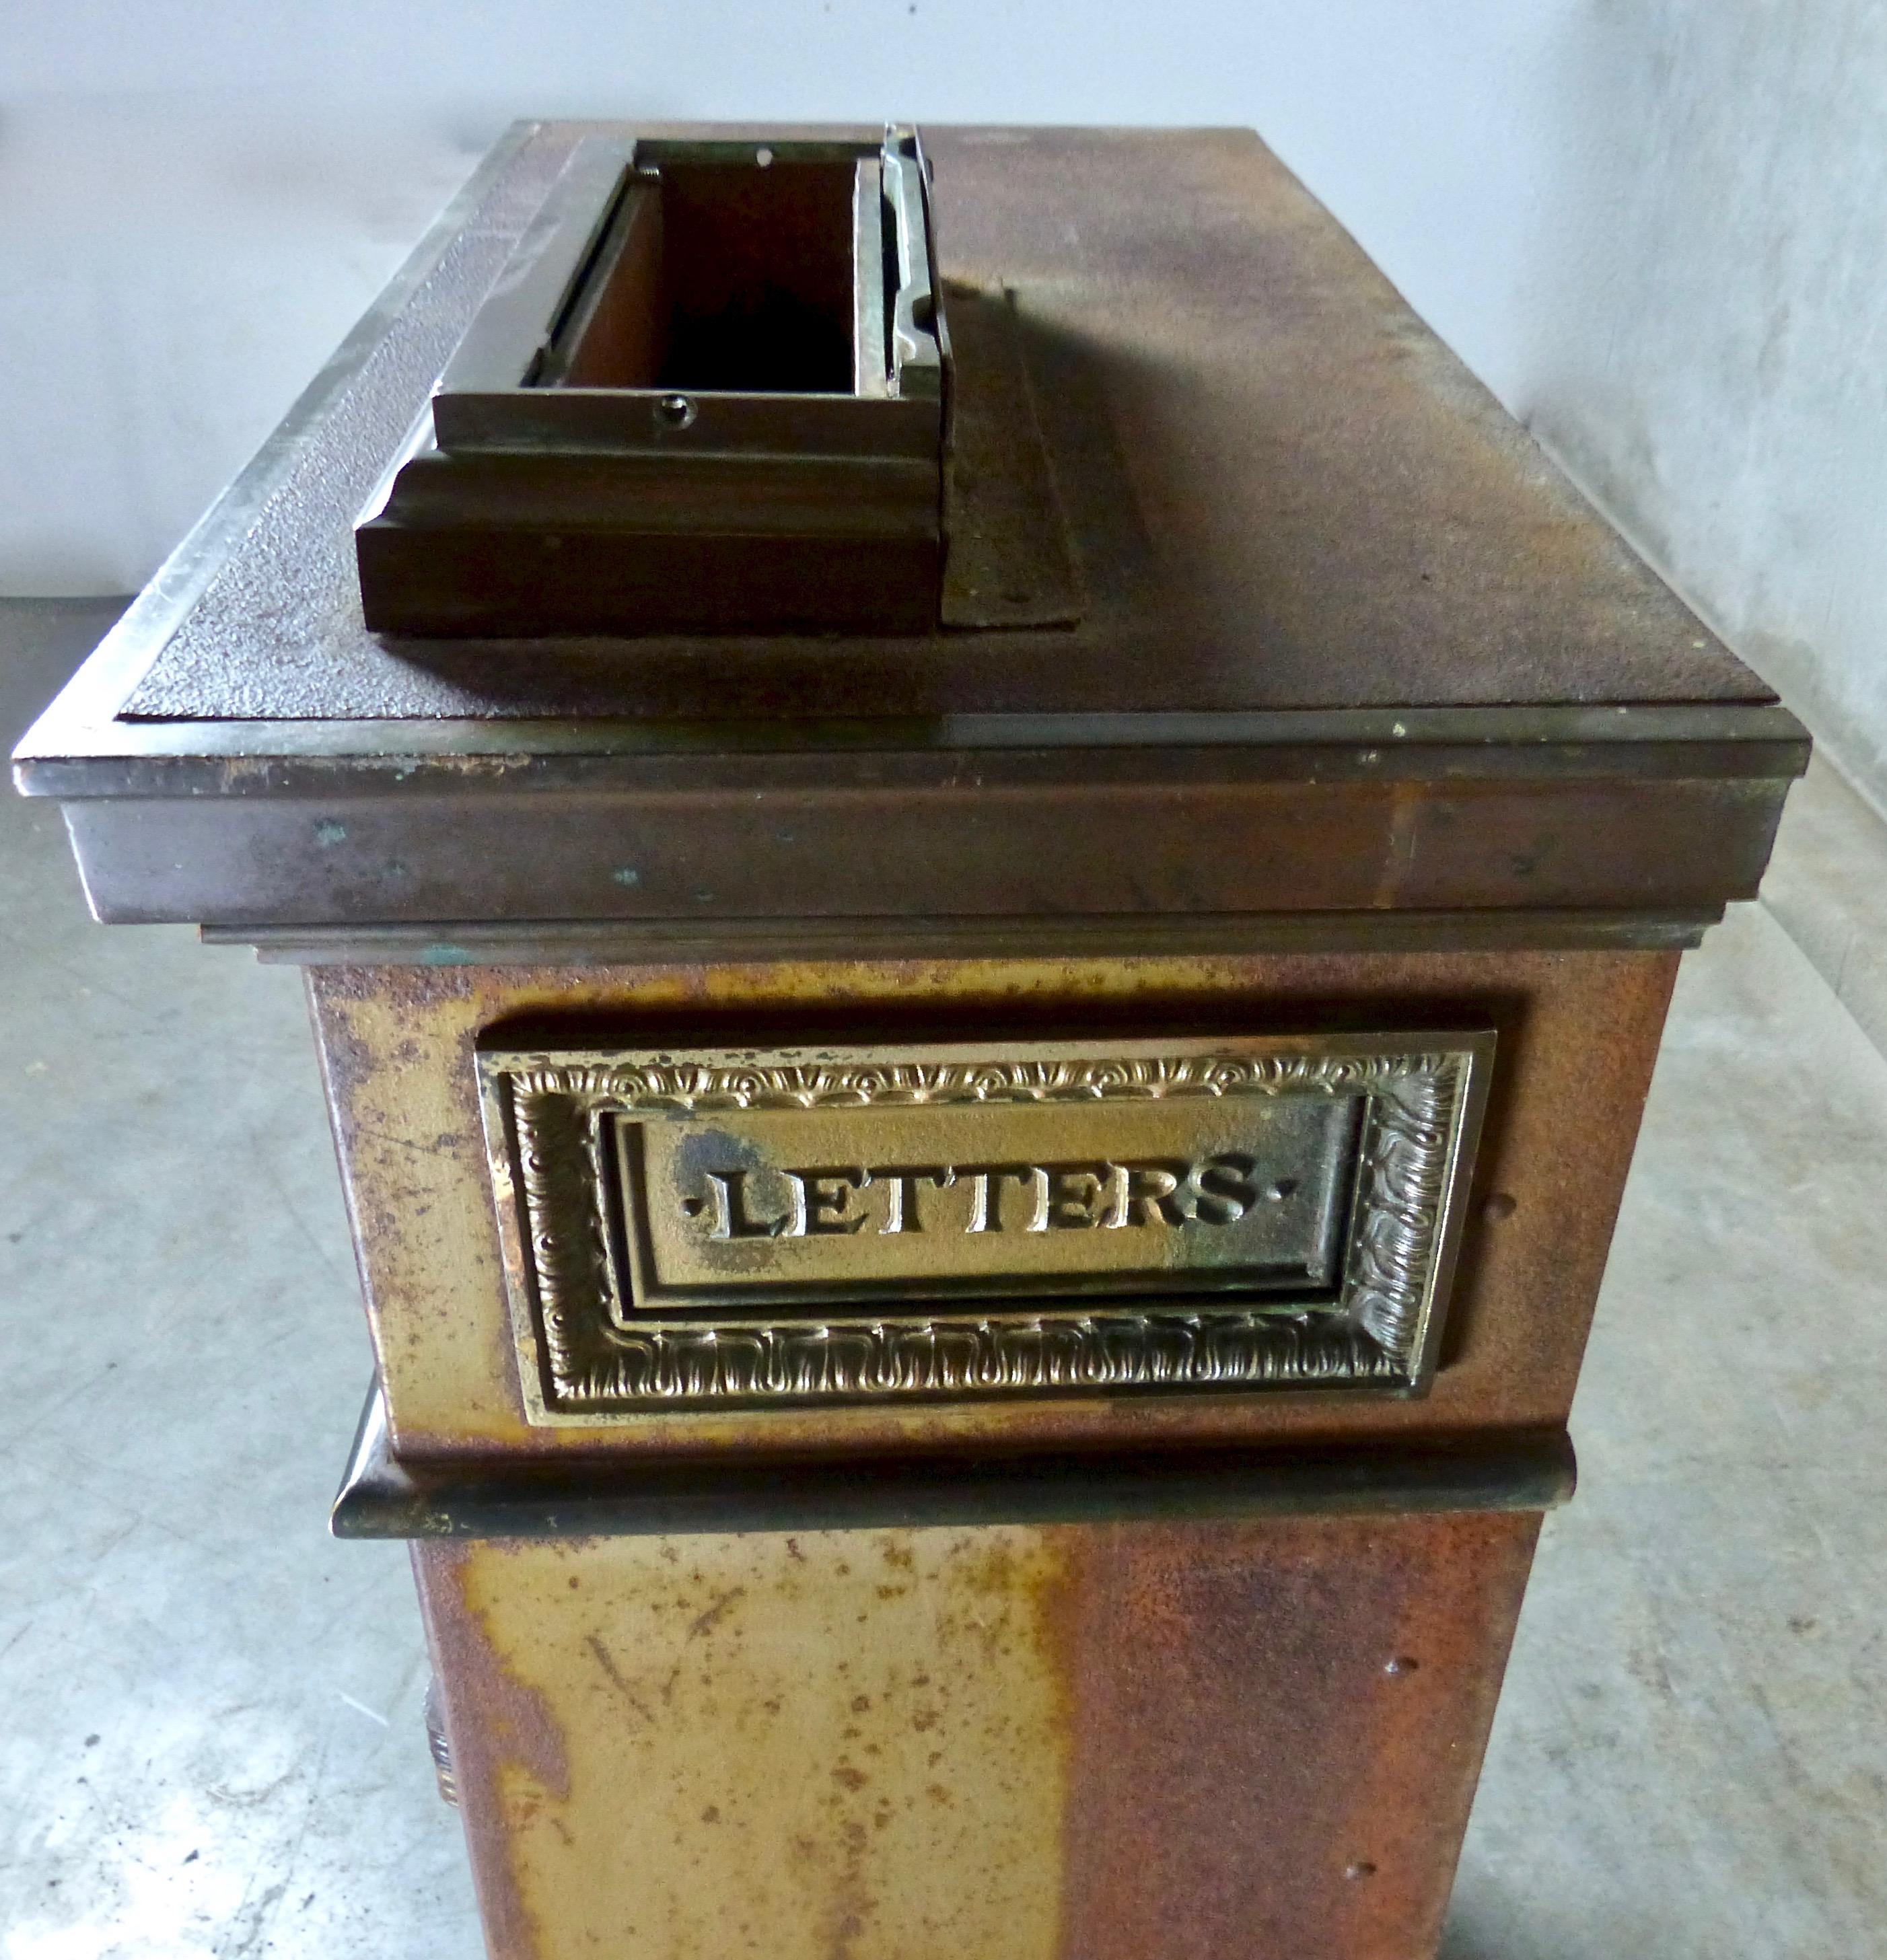 Art Deco U.S. Post Office Letterbox and Chute by Cutler Mfg, circa 1920s